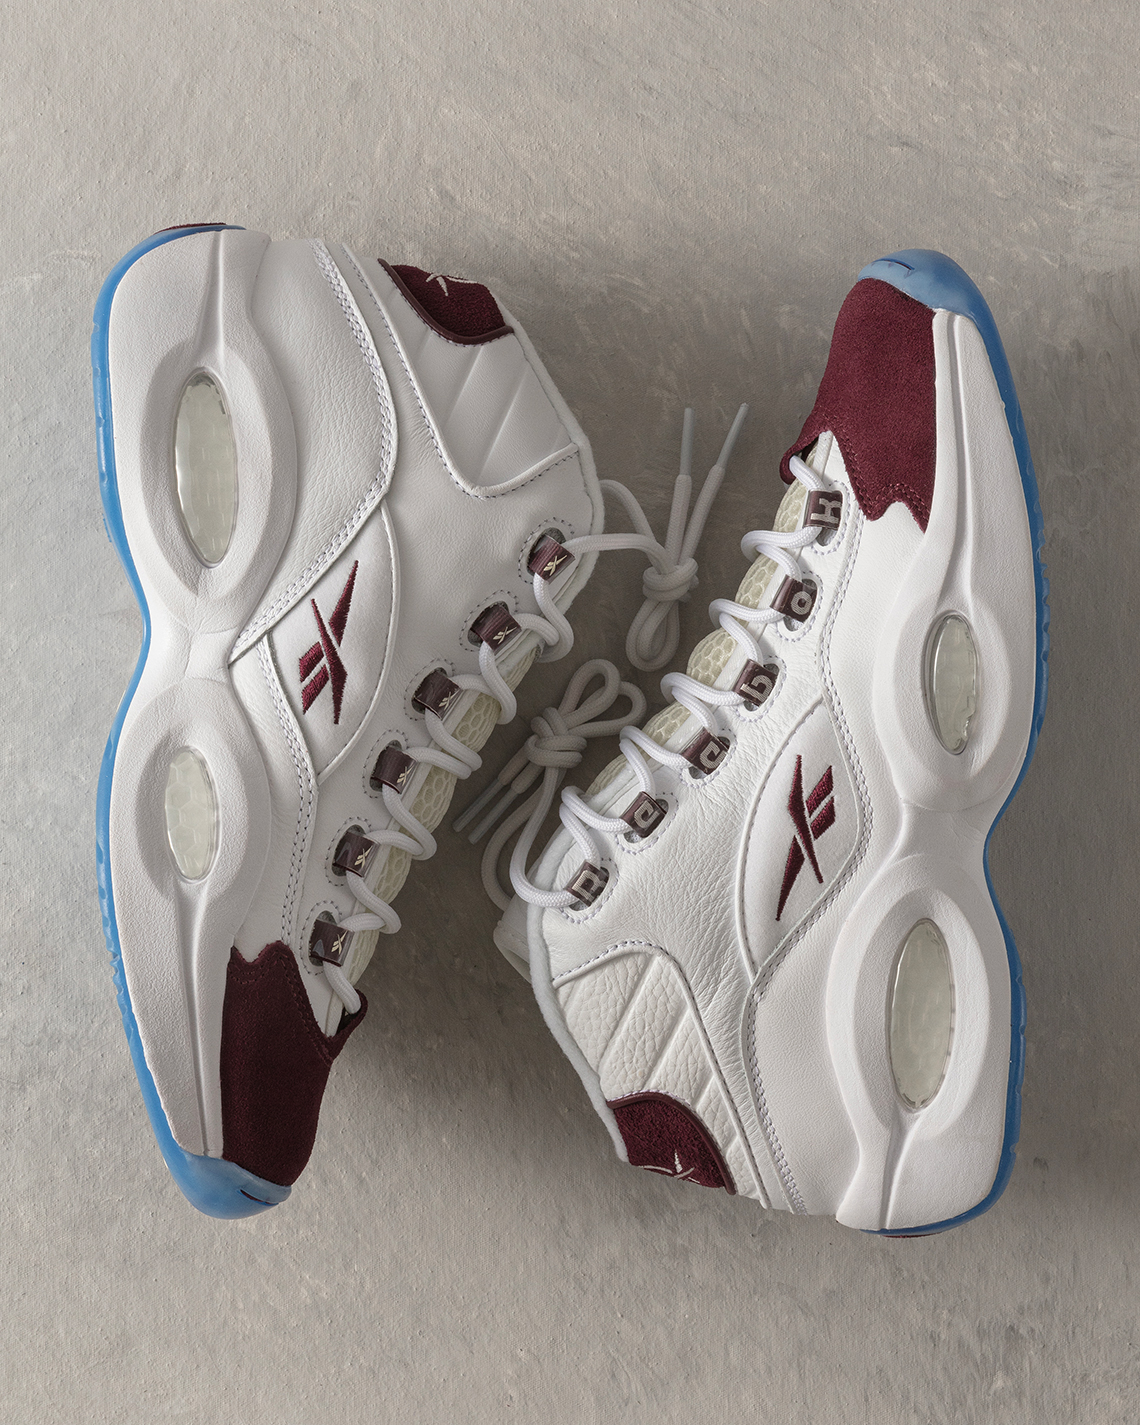 Packer And Omni Reebok Are Releasing A Collaboration This Friday Burgundy Suede Release Date 9